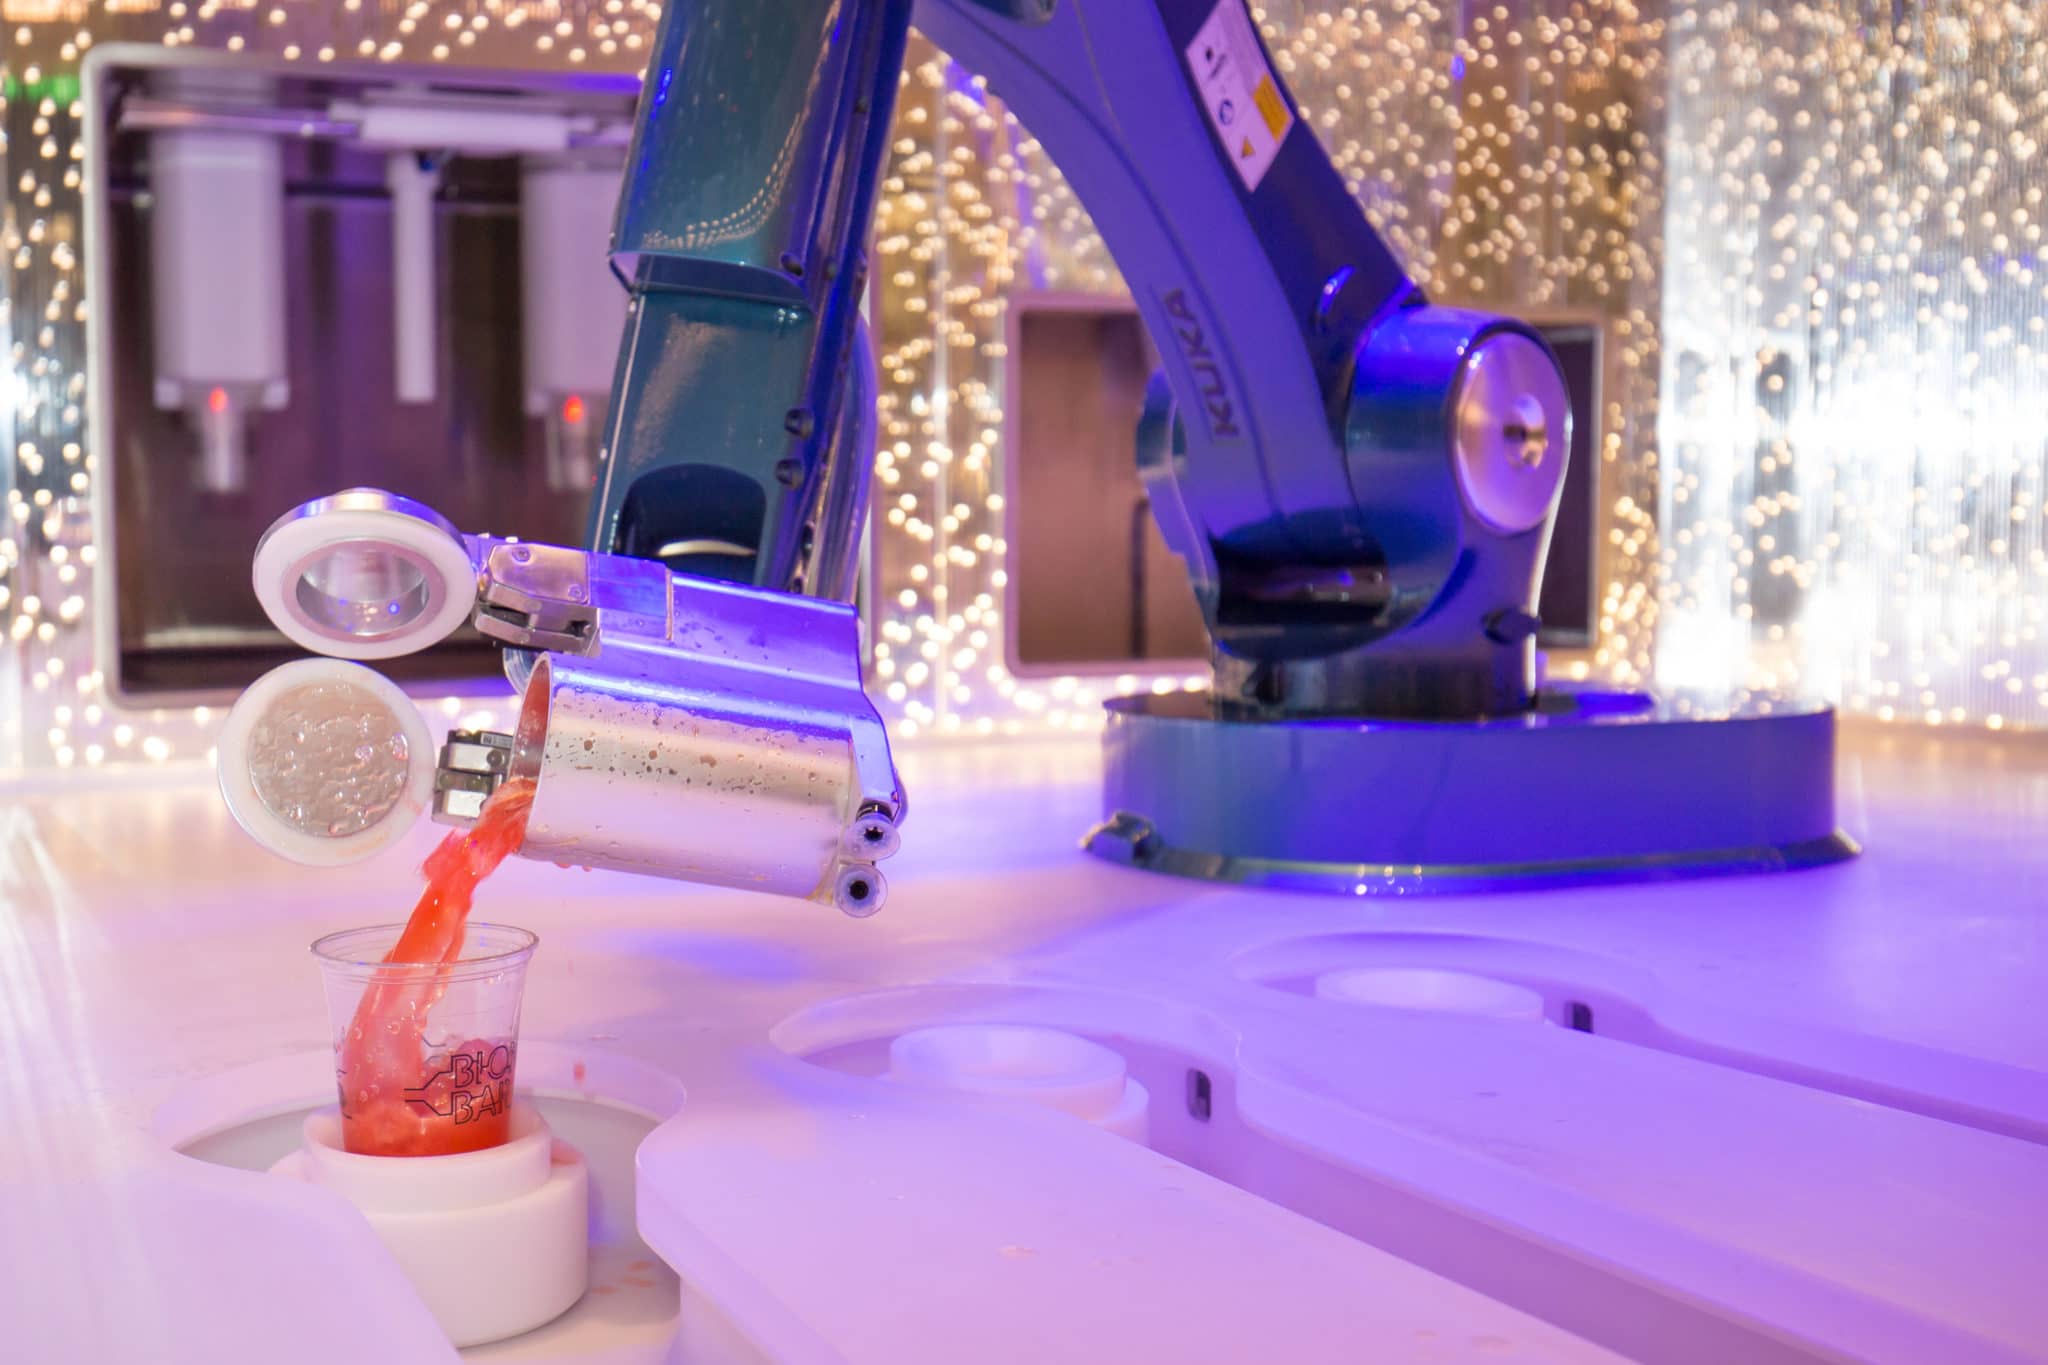 Robot Bartender | Takes Orders, Mixes Drinks & Wows Guests